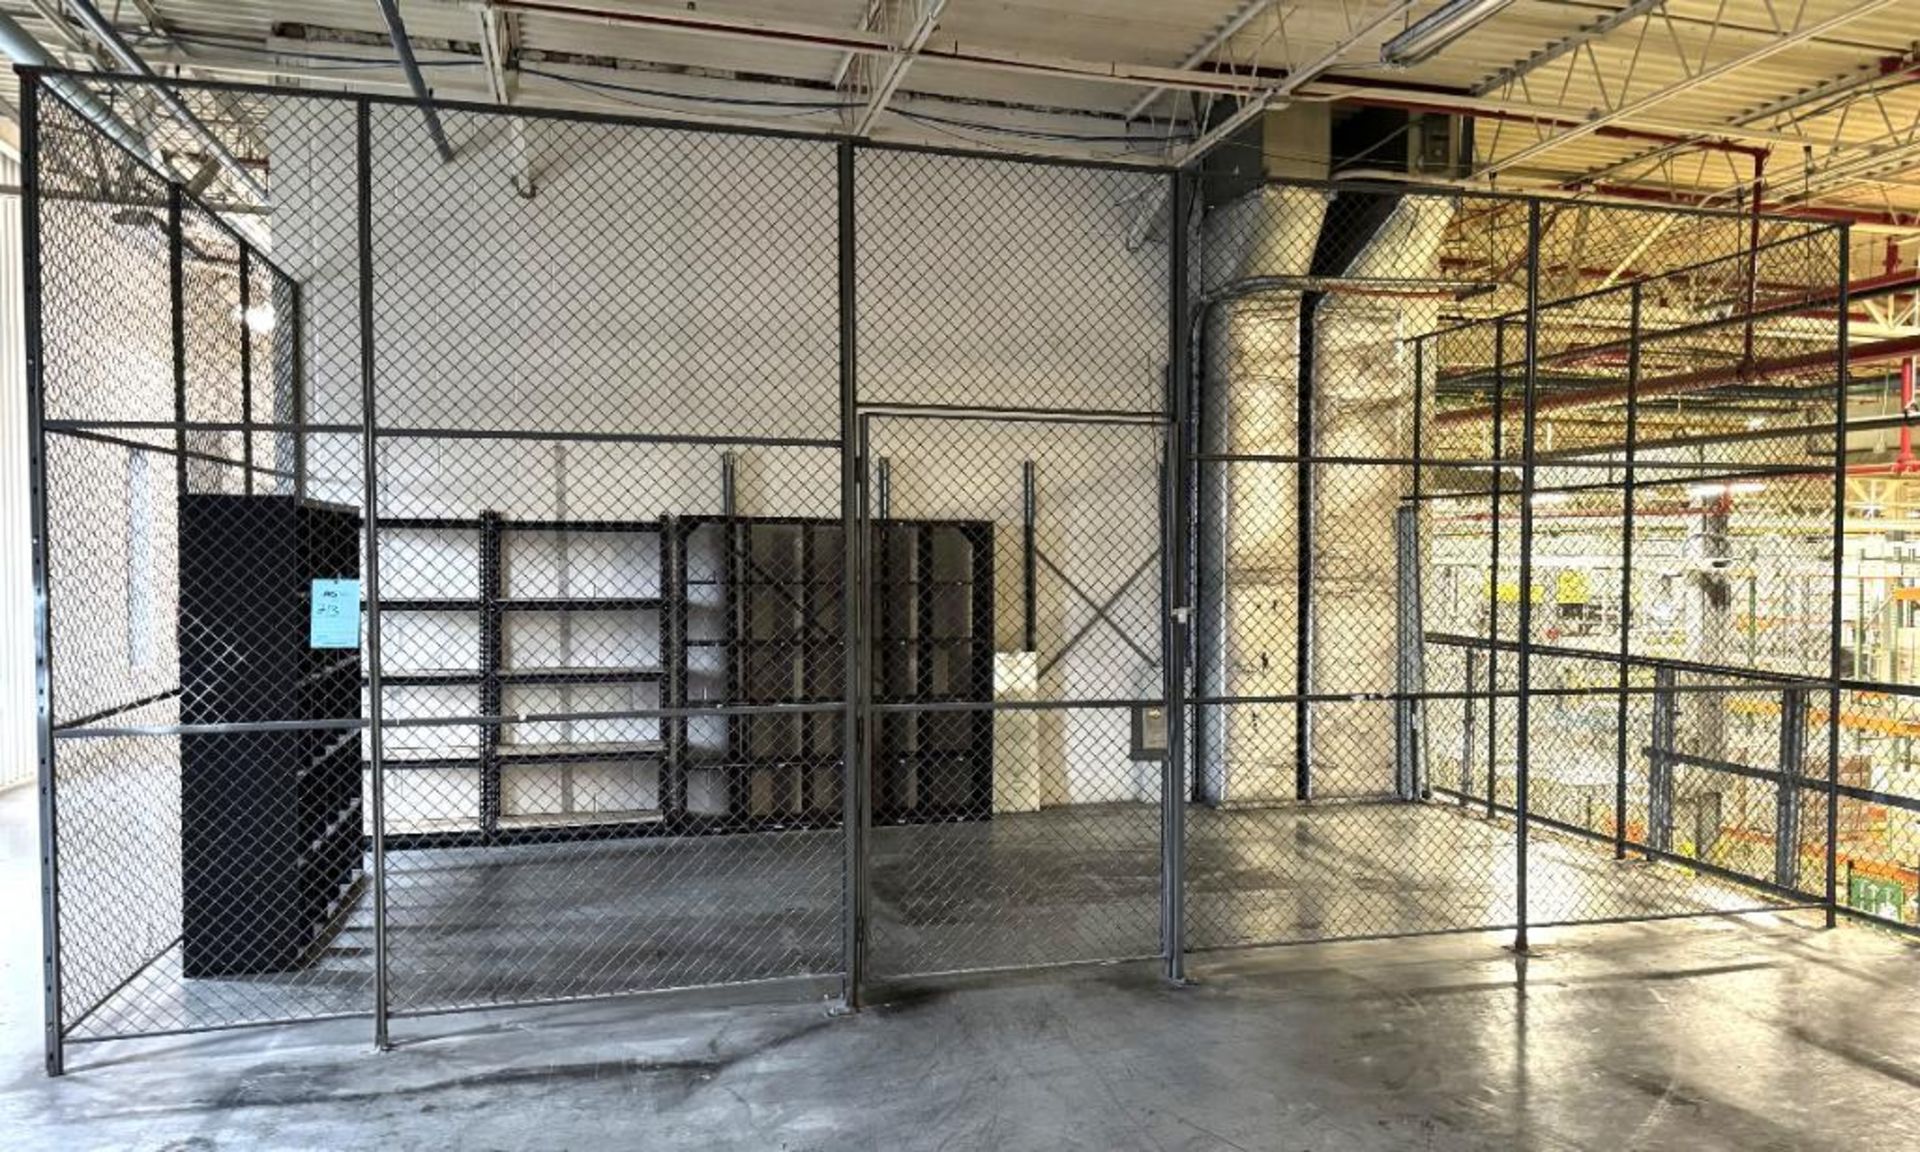 (3) Sided Security Cage, Approximate 12' x 24'. - Image 2 of 2